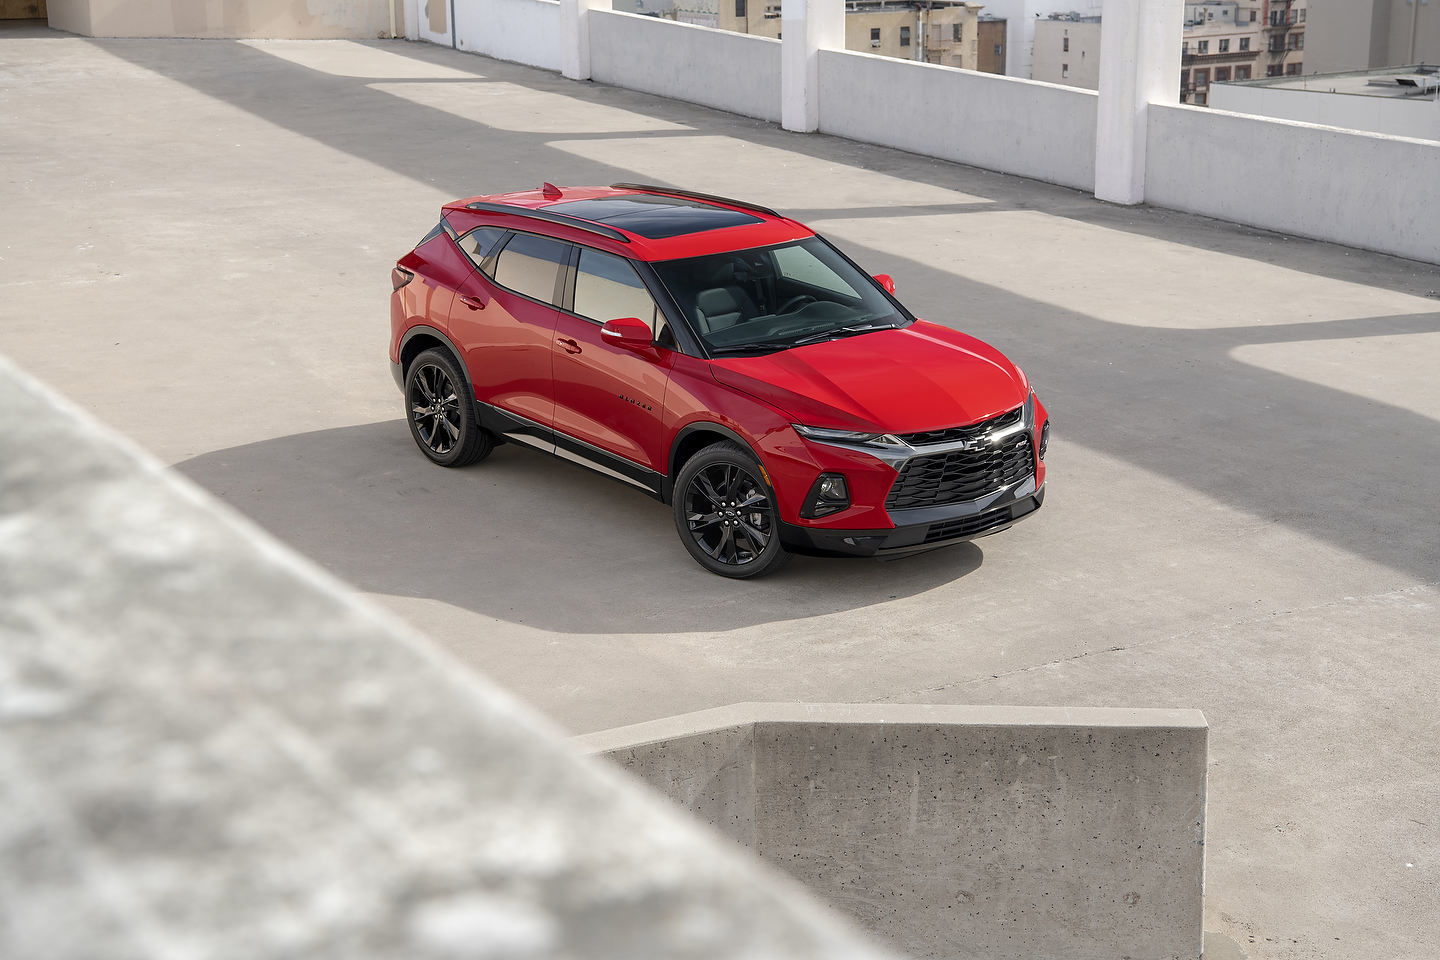 Chevrolet Blazer 2021: The Perfect SUV For Those Who Love To Drive